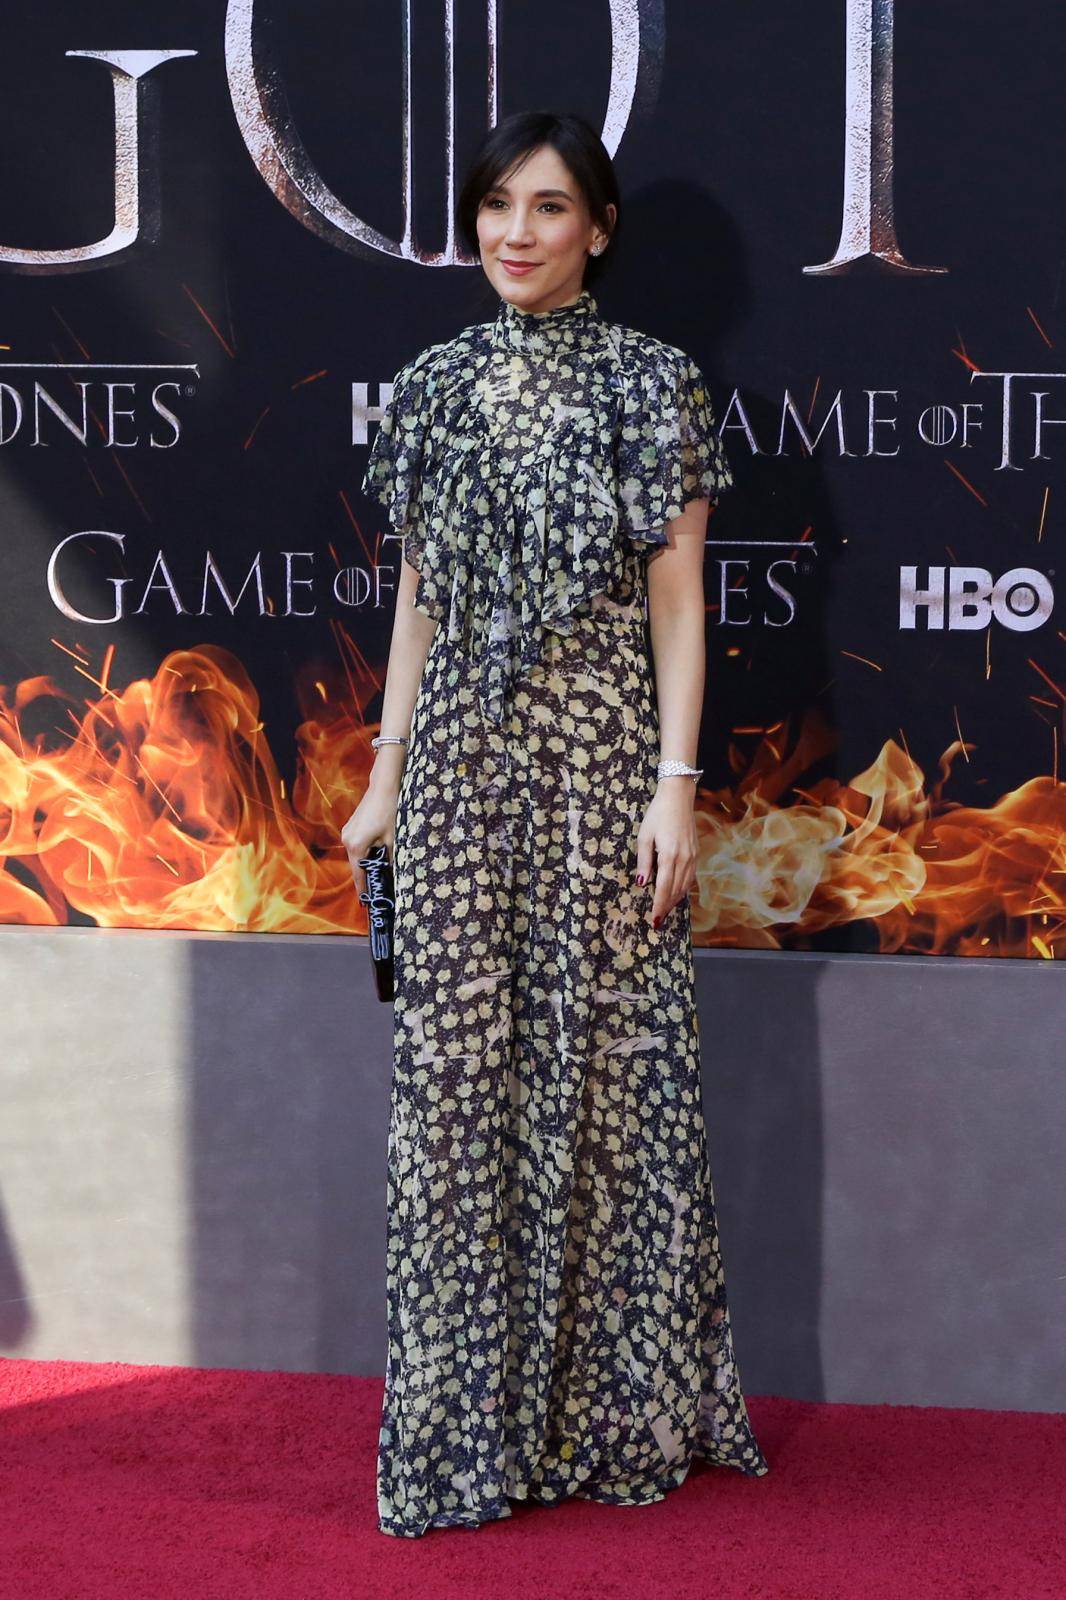 Sibel Kekilli arrives for the premiere of the final season of "Game of Thrones" at Radio City Music Hall in New York